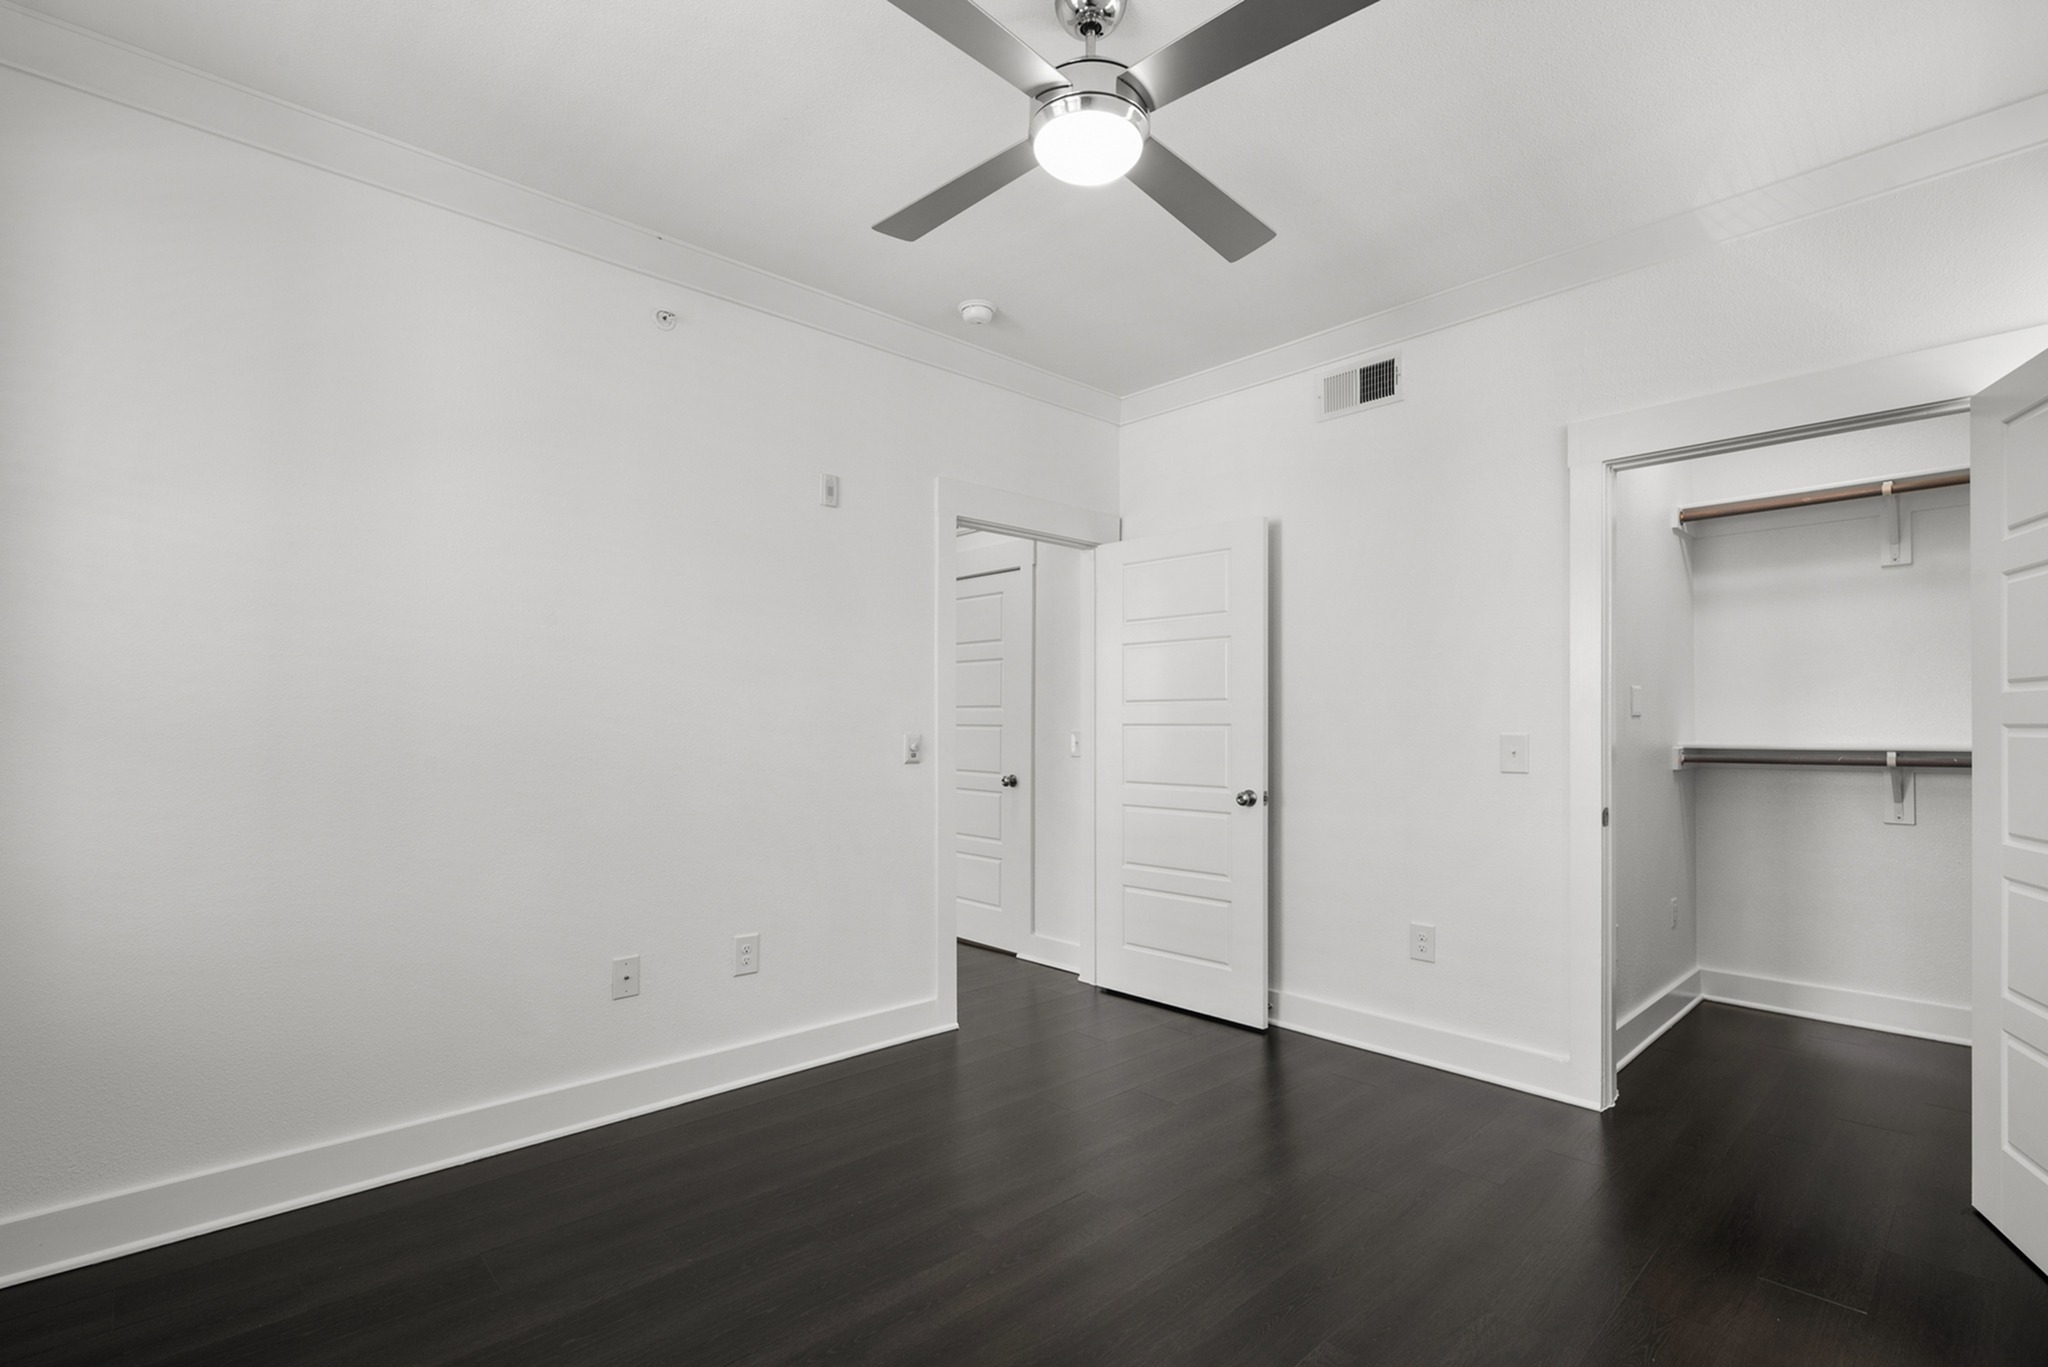 Floor Plan 2 Ceiling Fan | Apartments Conroe TX | The Towers Woodland